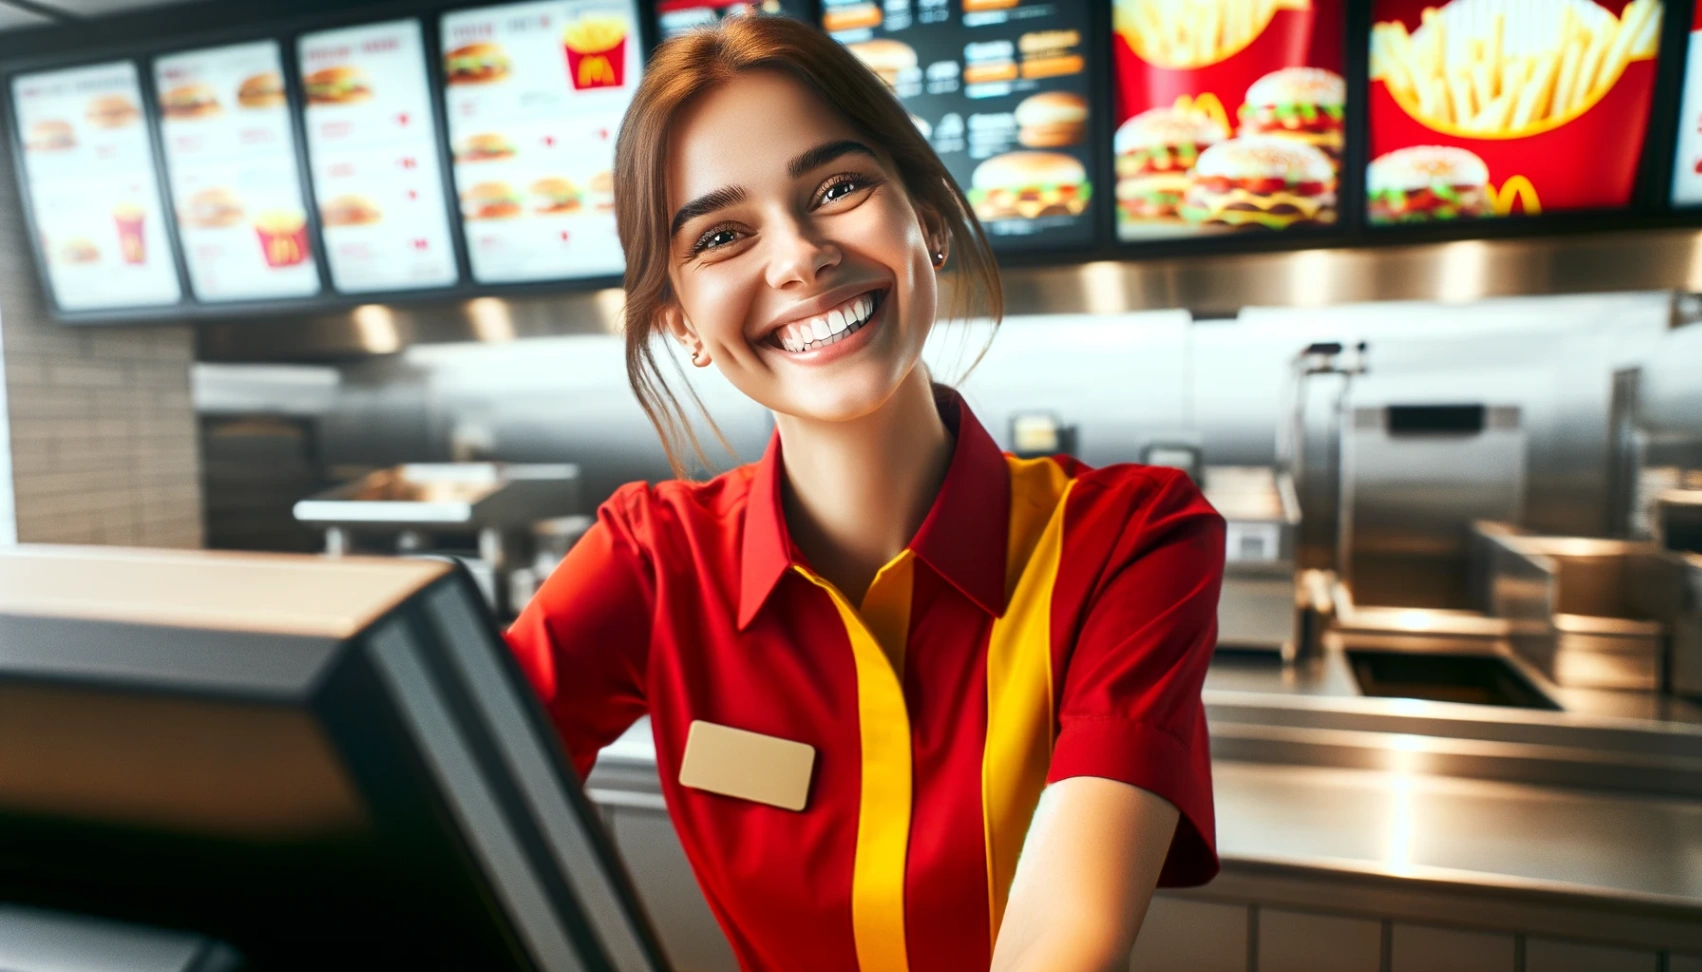 McDonald's Careers: How to Apply for Job Openings